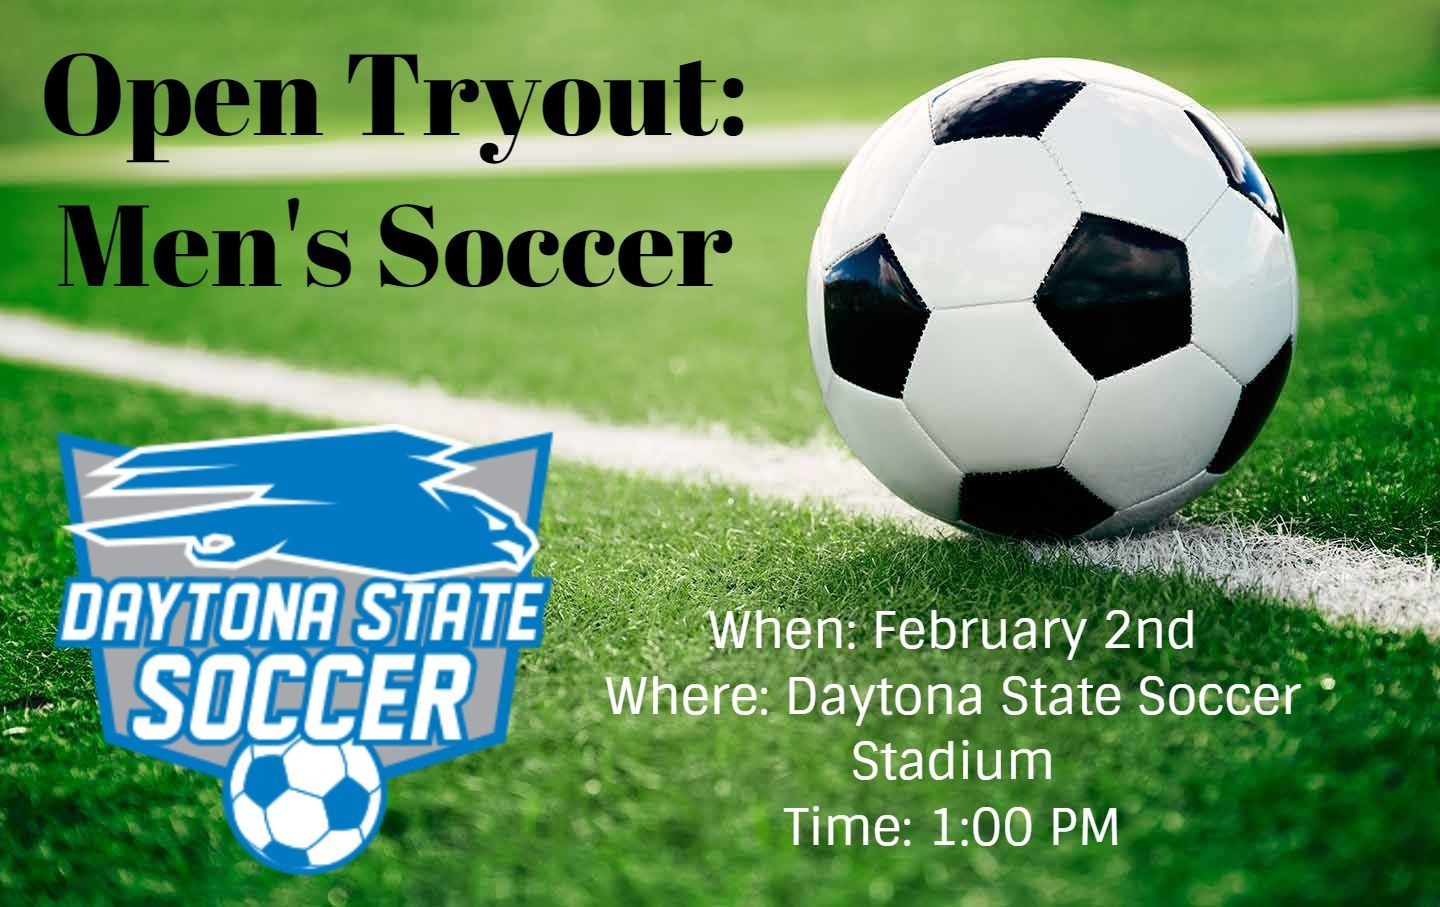 Men’s Soccer to Host Open Tryout February 2nd